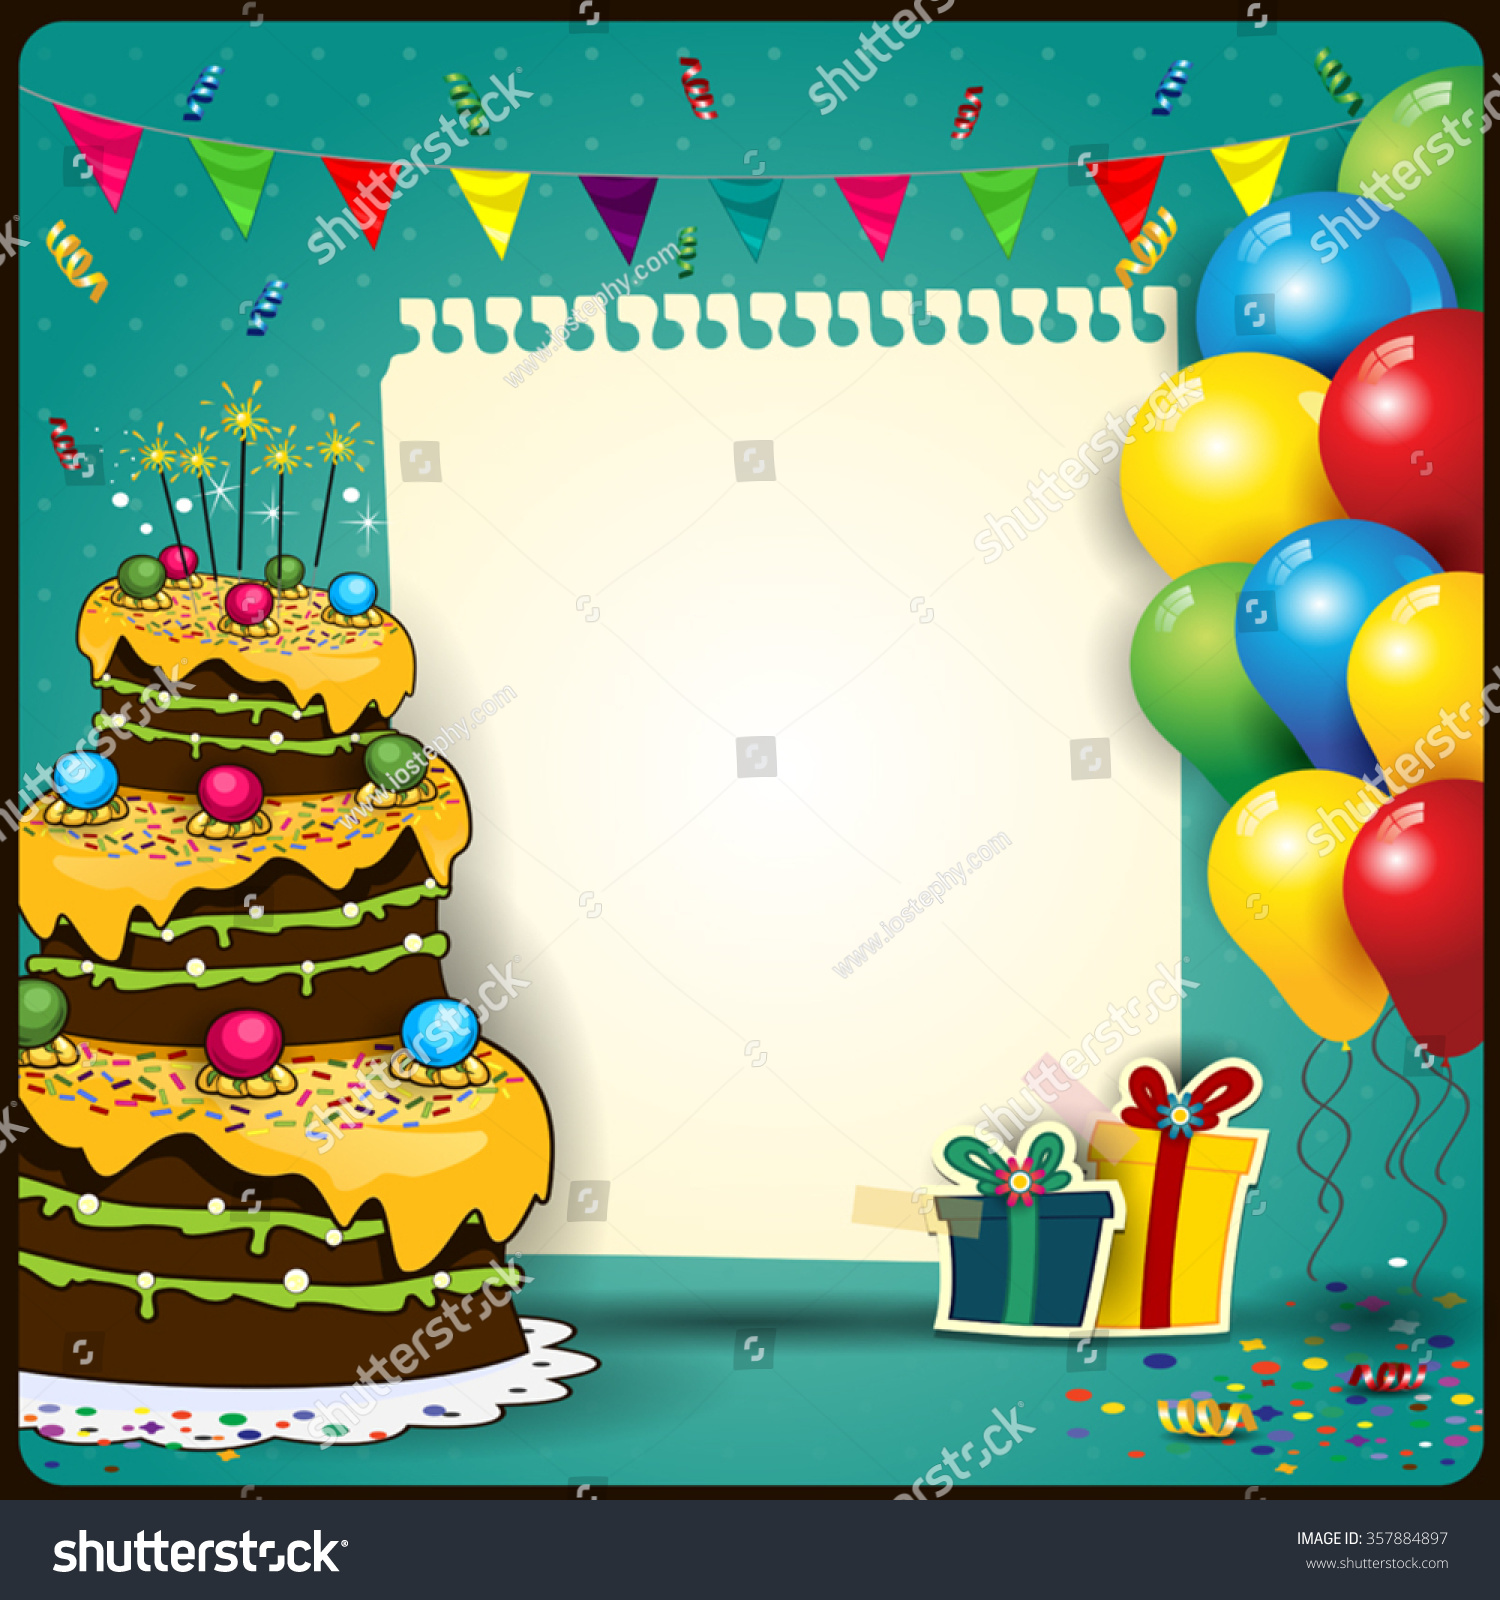 Happy Birthday With A Sheet Of Paper With Balloons And Cake-Space To ...